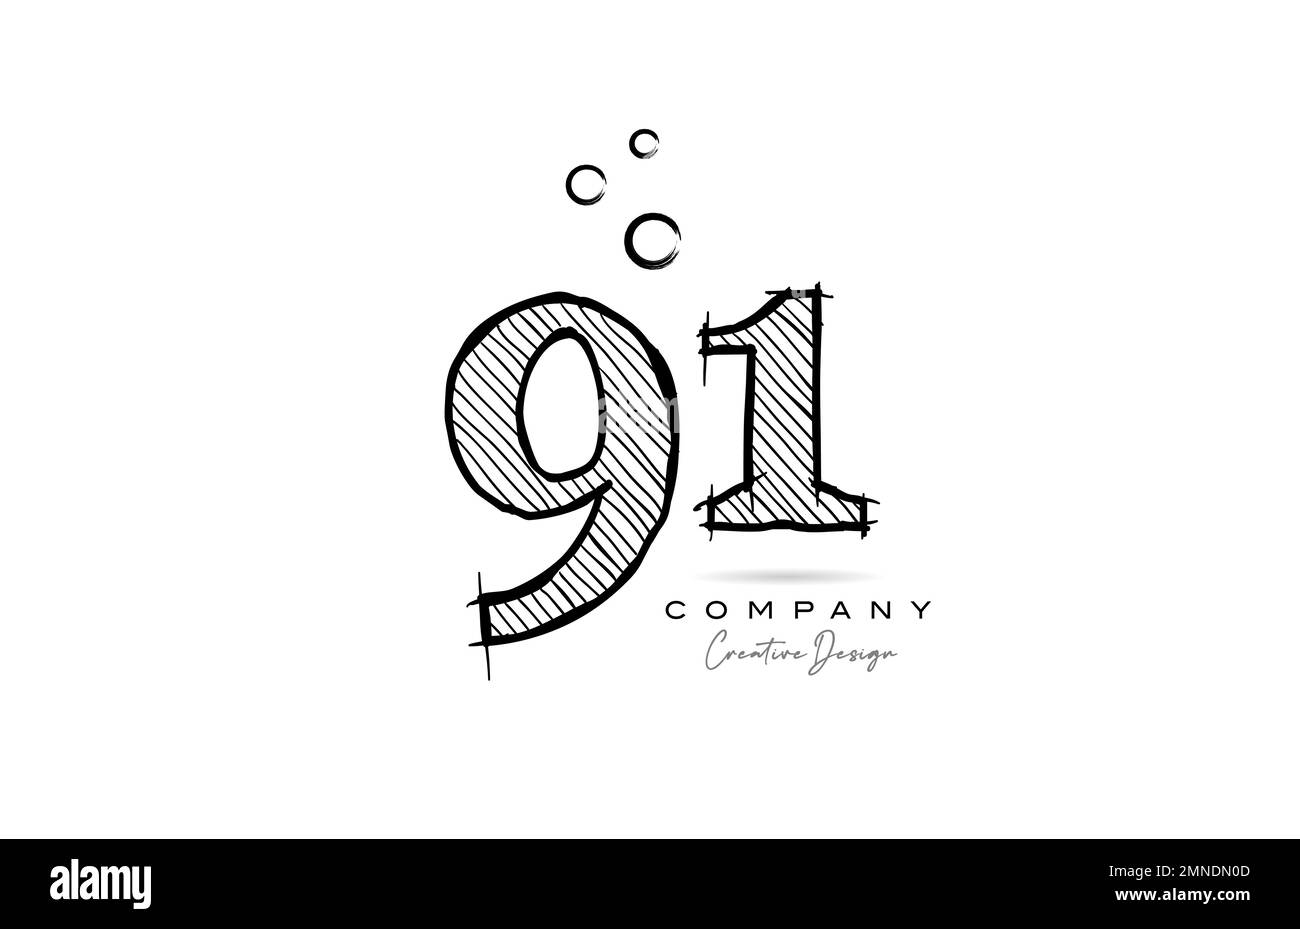 hand drawing number 91 logo icon design for company template or business. Creative logotype in pencil style Stock Vector